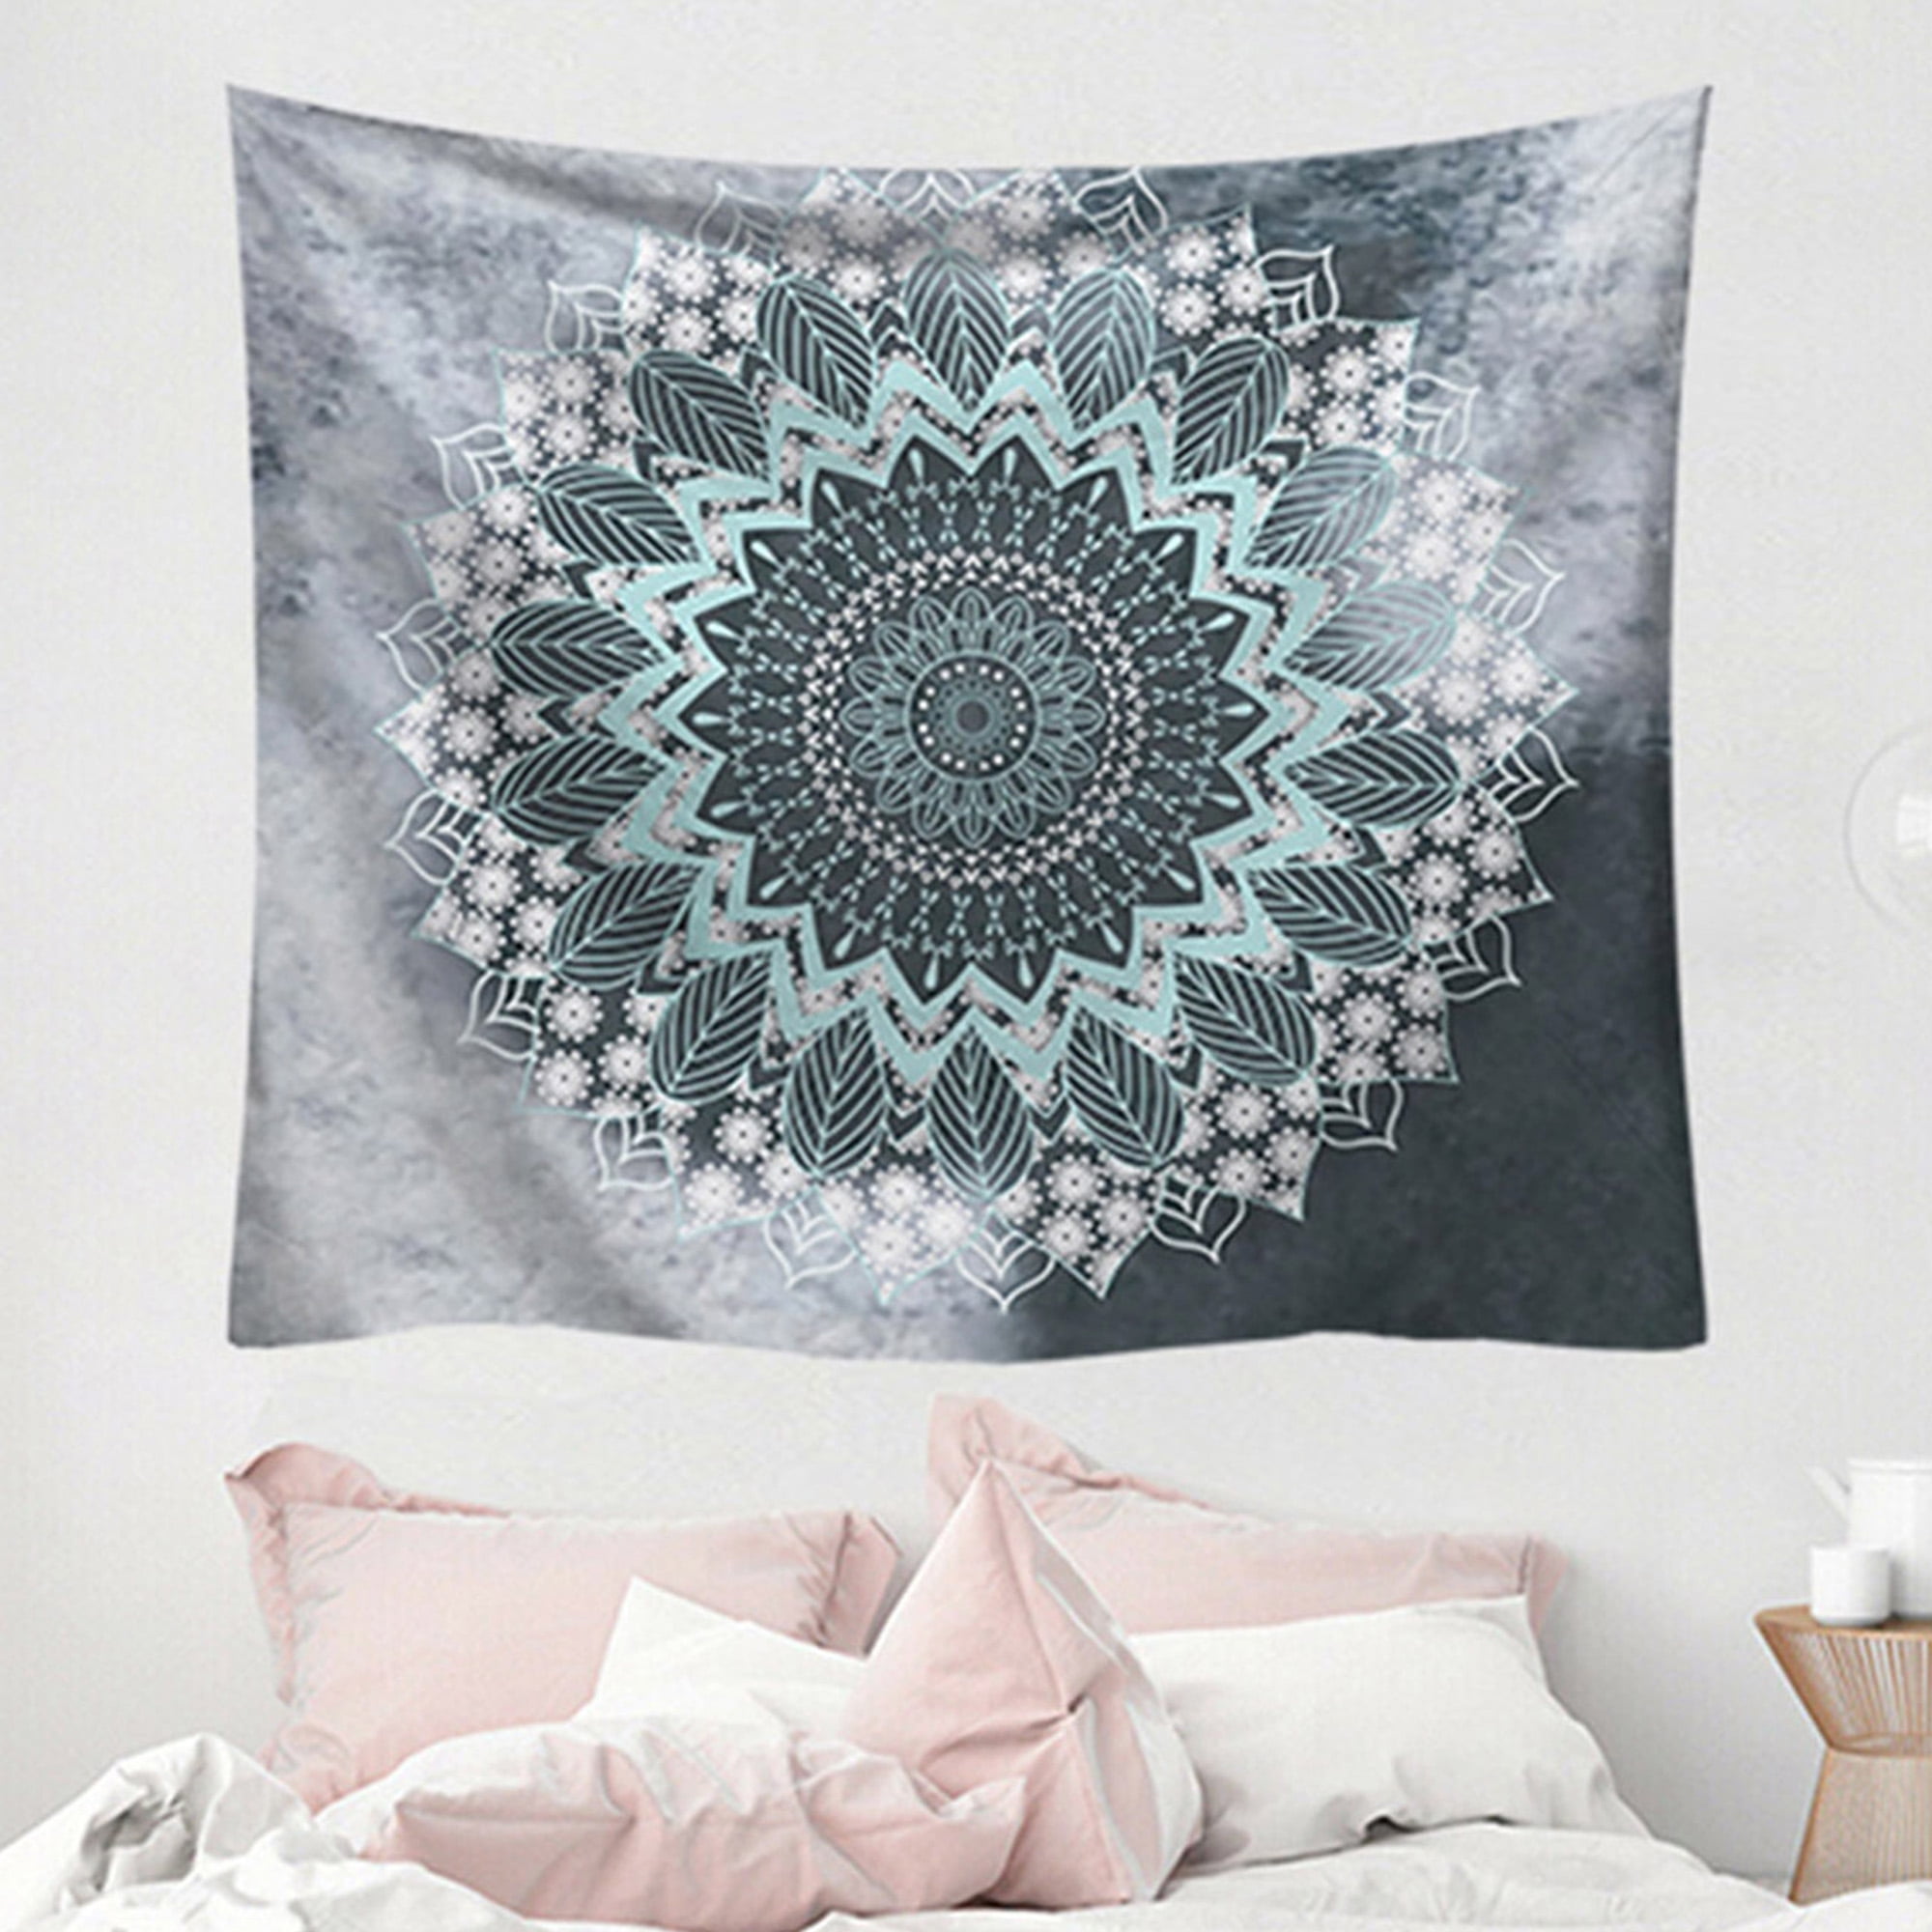 Psychedelic Mandala Flower Tapestry Hippie Wall Hanging Art Blanket Home Decor 